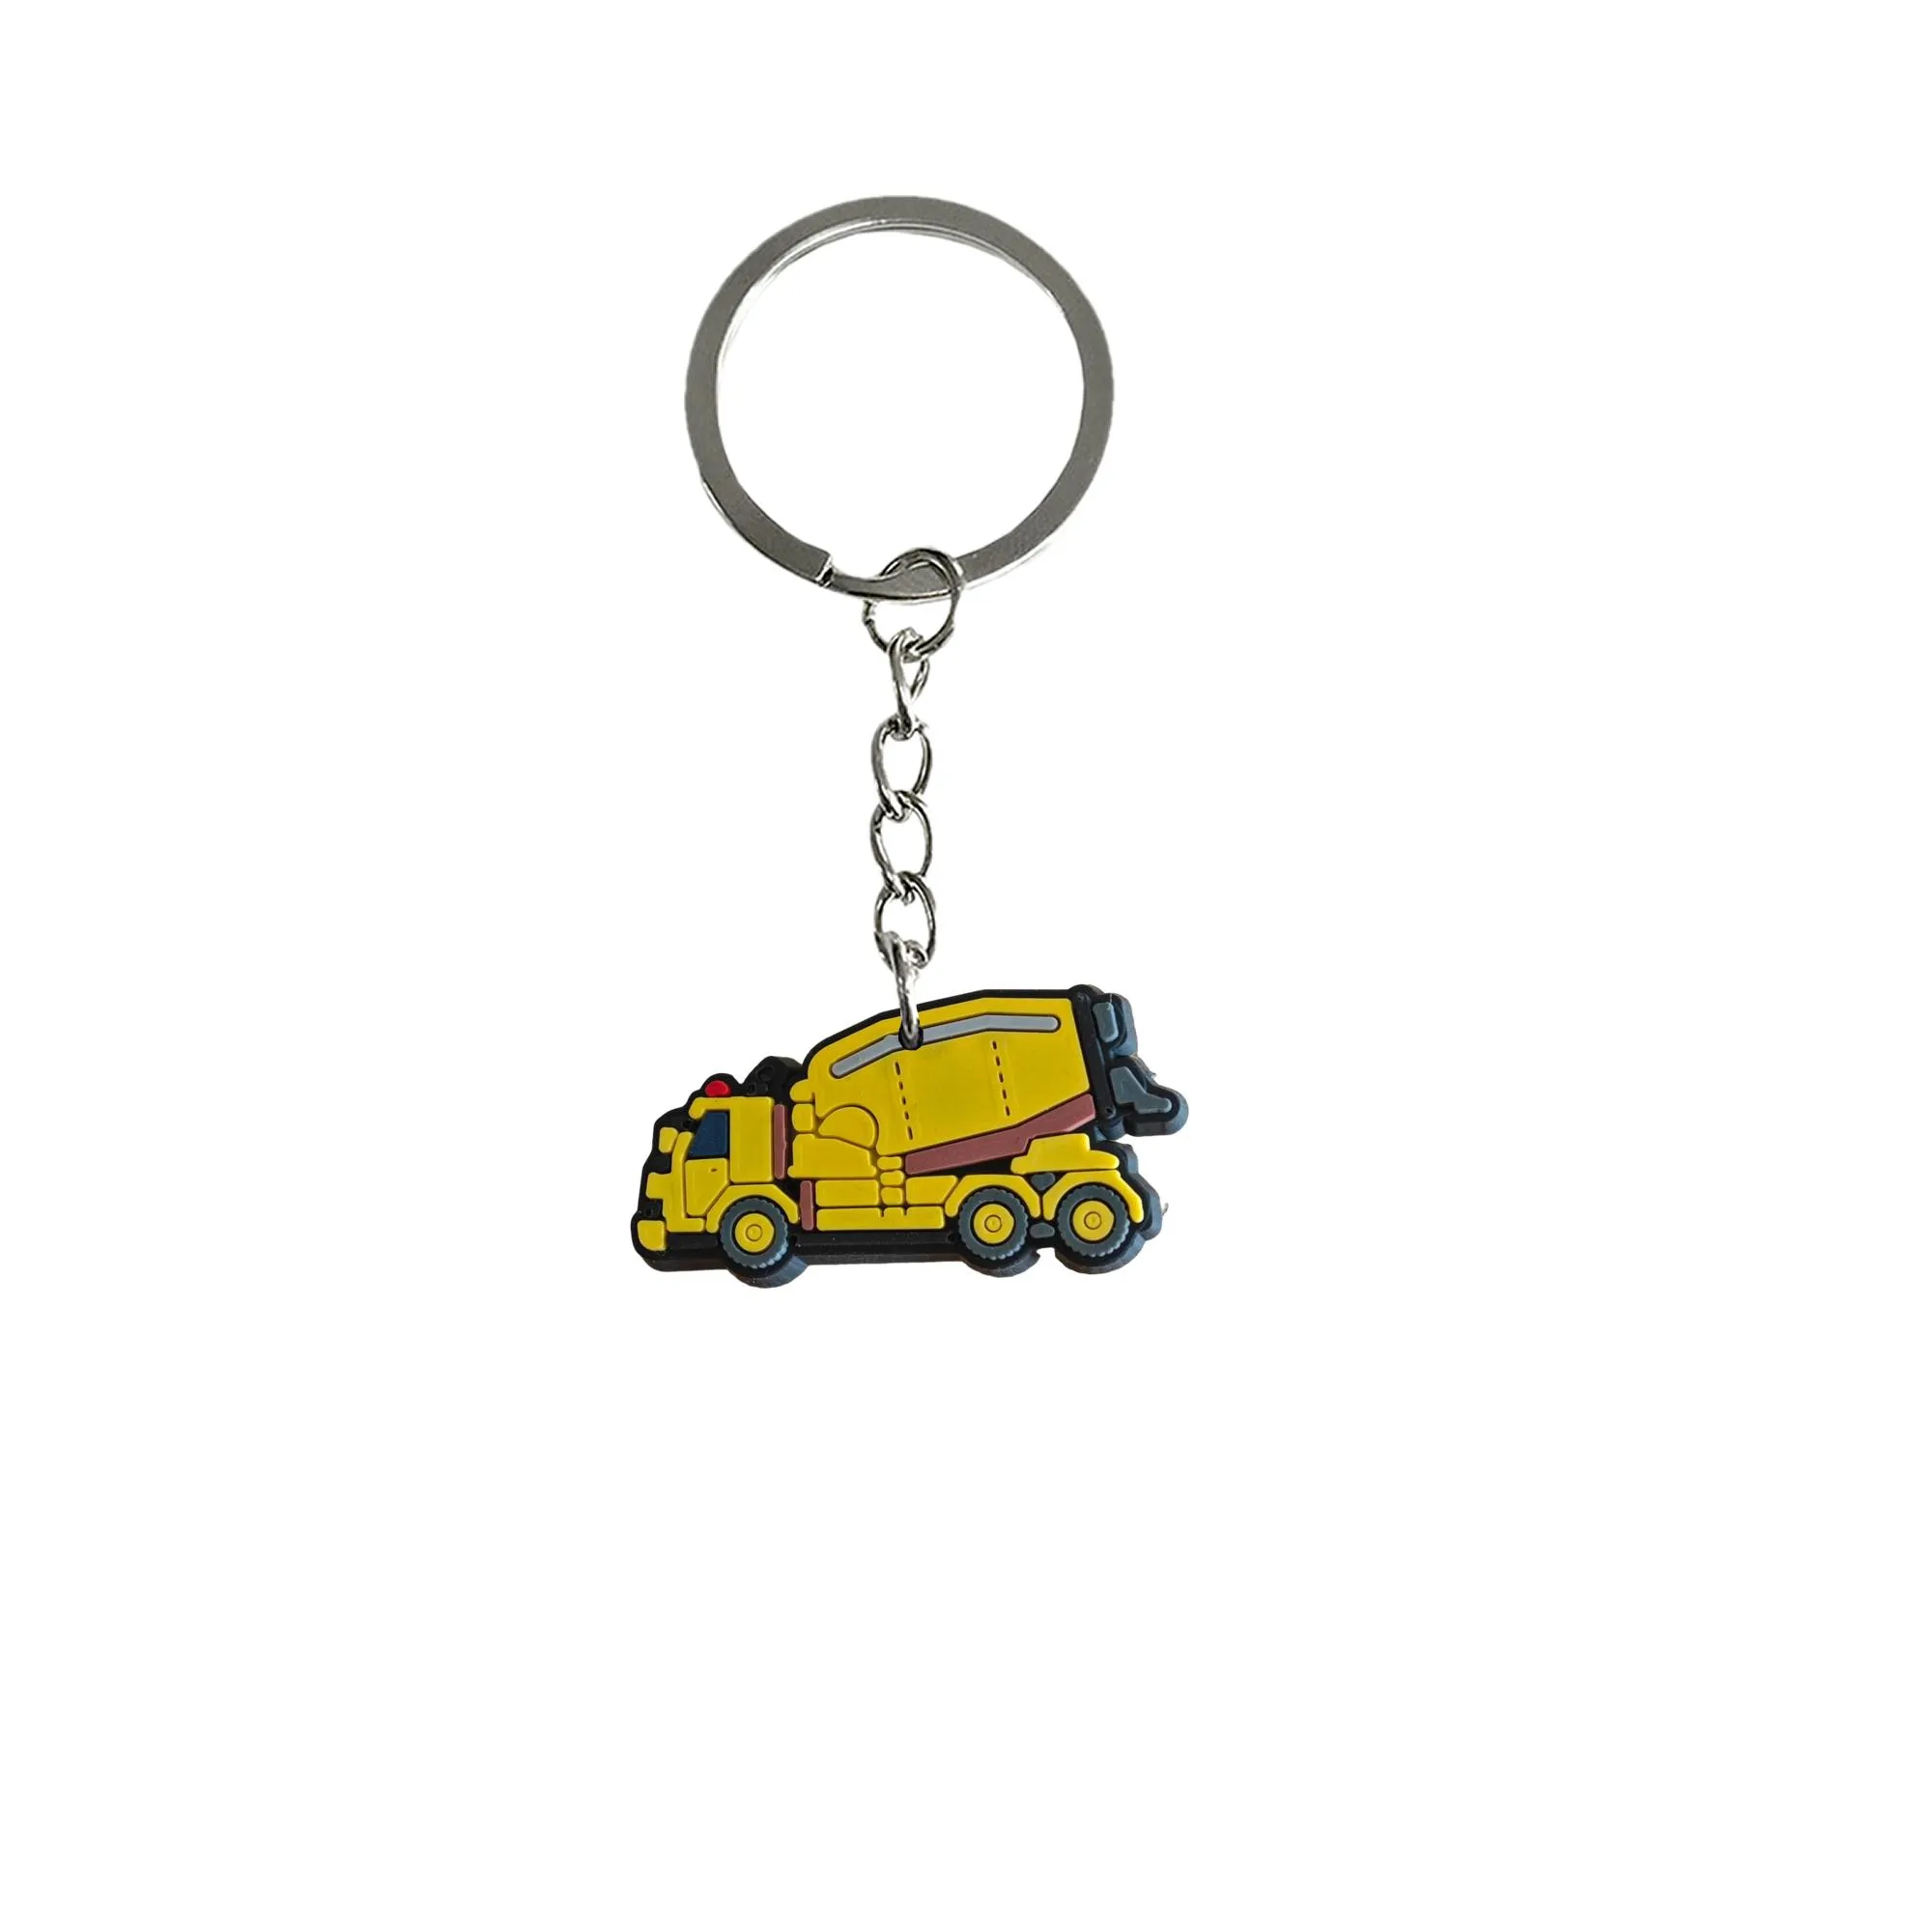 excavator 12 keychain key chain accessories for backpack handbag and car gift valentines day ring boys party favors keyring suitable schoolbag keychains shoulder bag pendant charm women